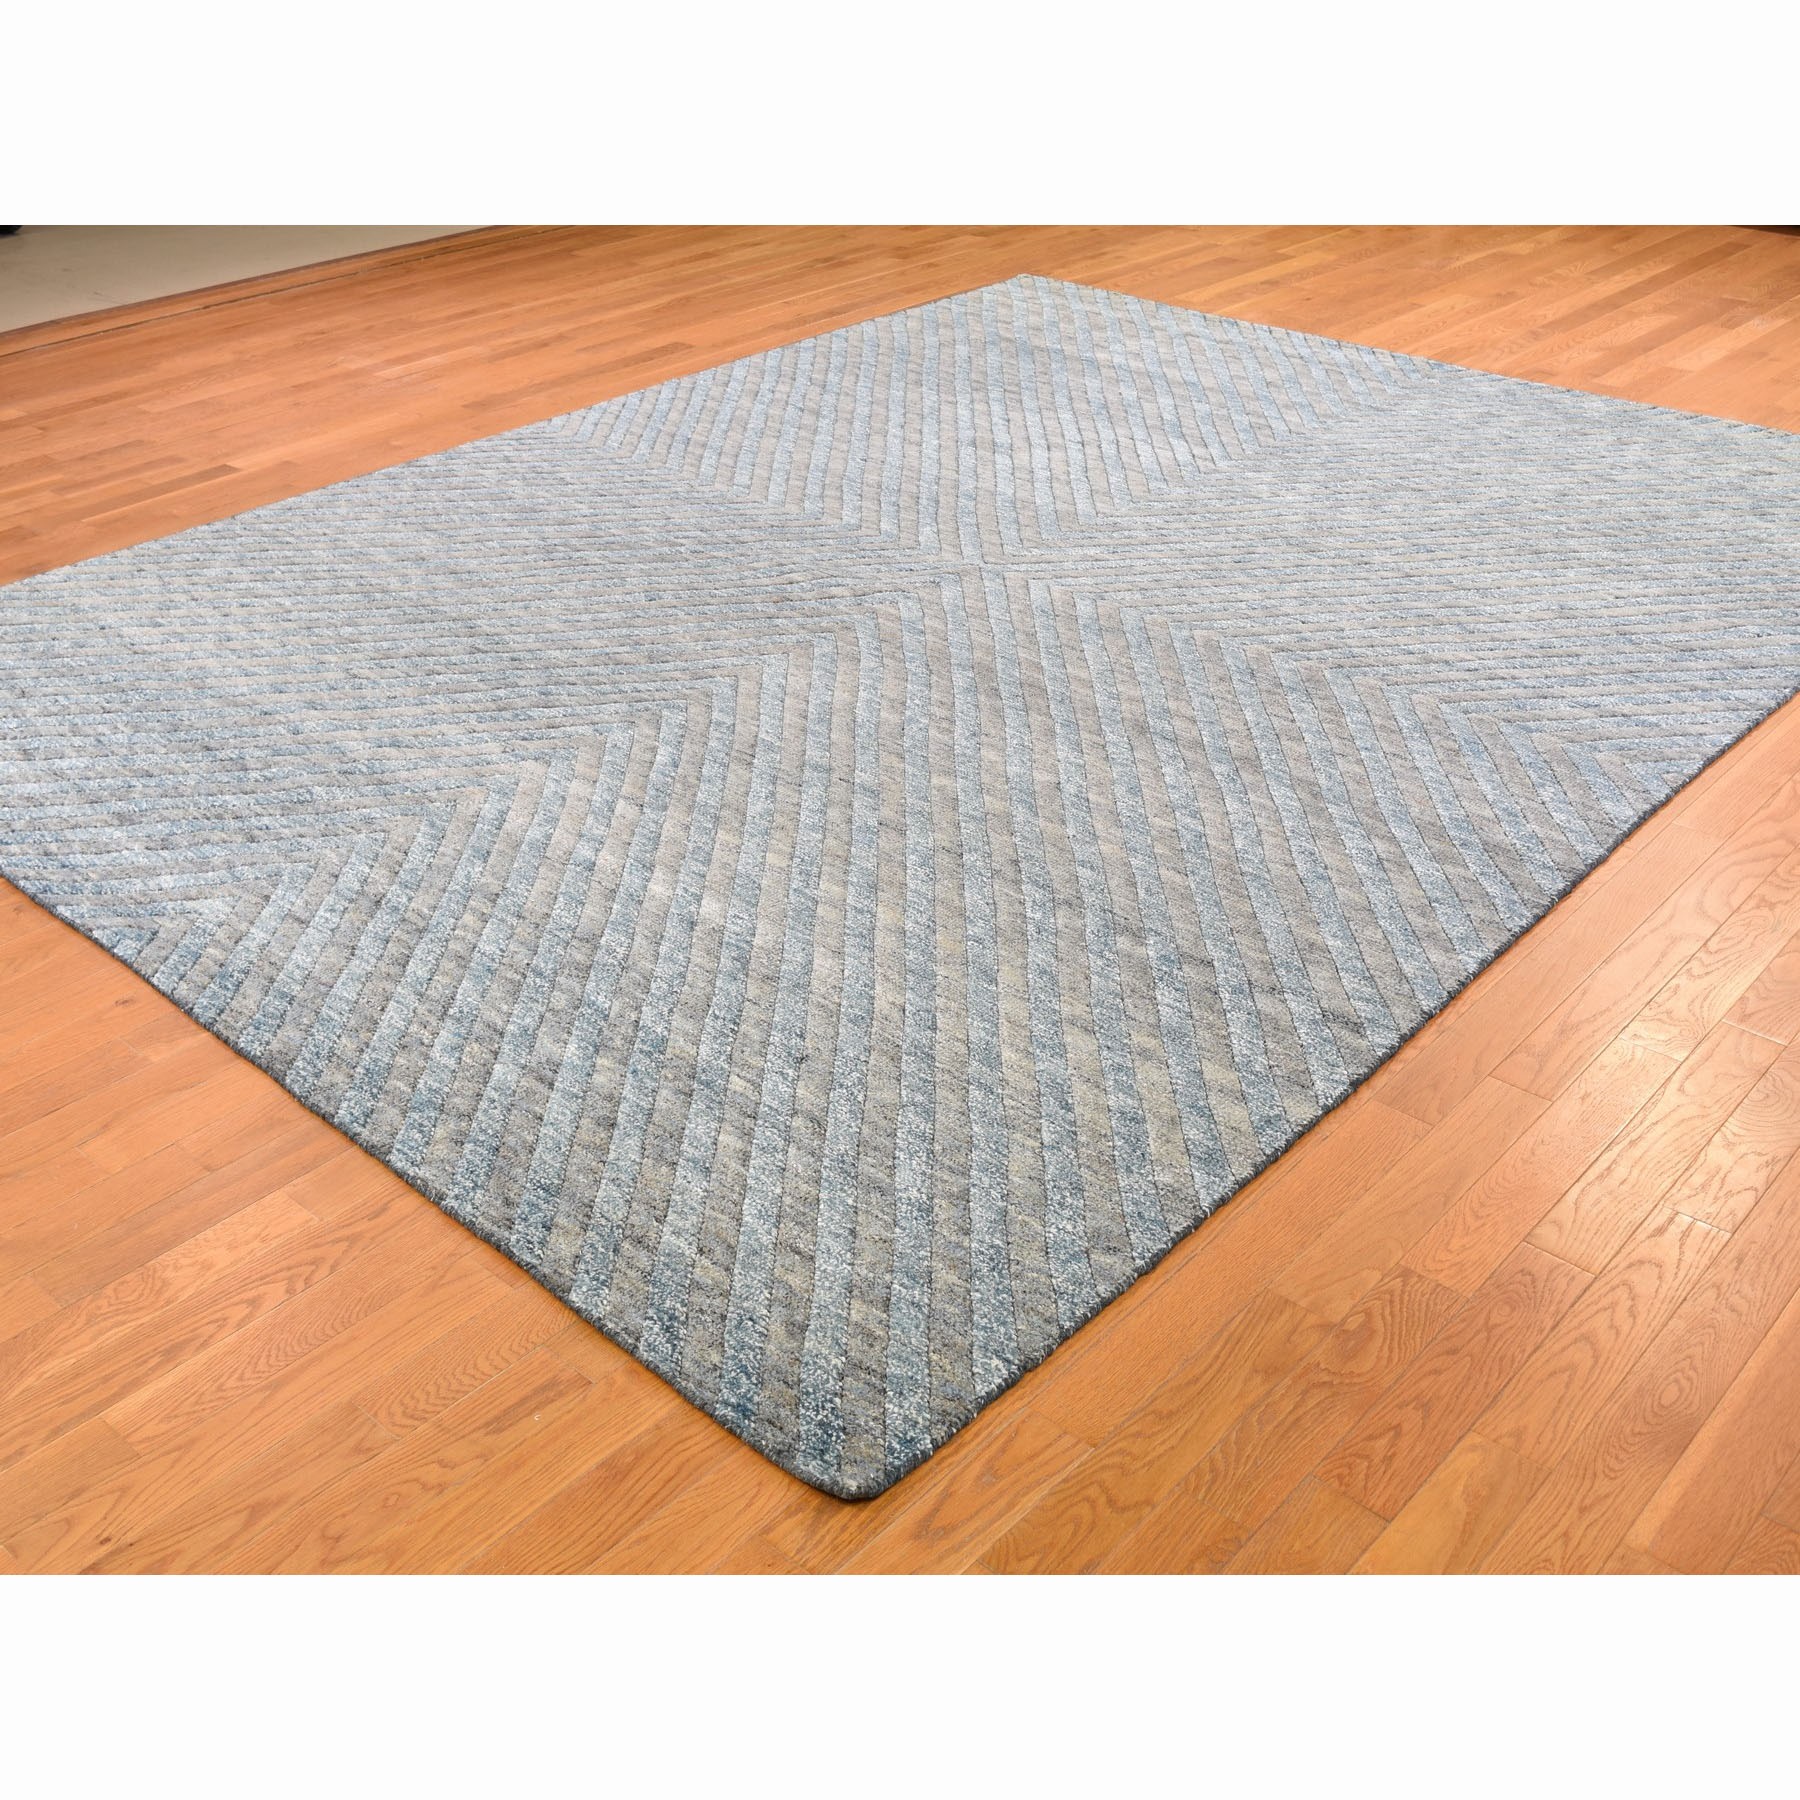 9-1 x11-10  Blue Pure Wool Geometric Design Thick And Plush Hand Knotted Modern Oriental Rug 